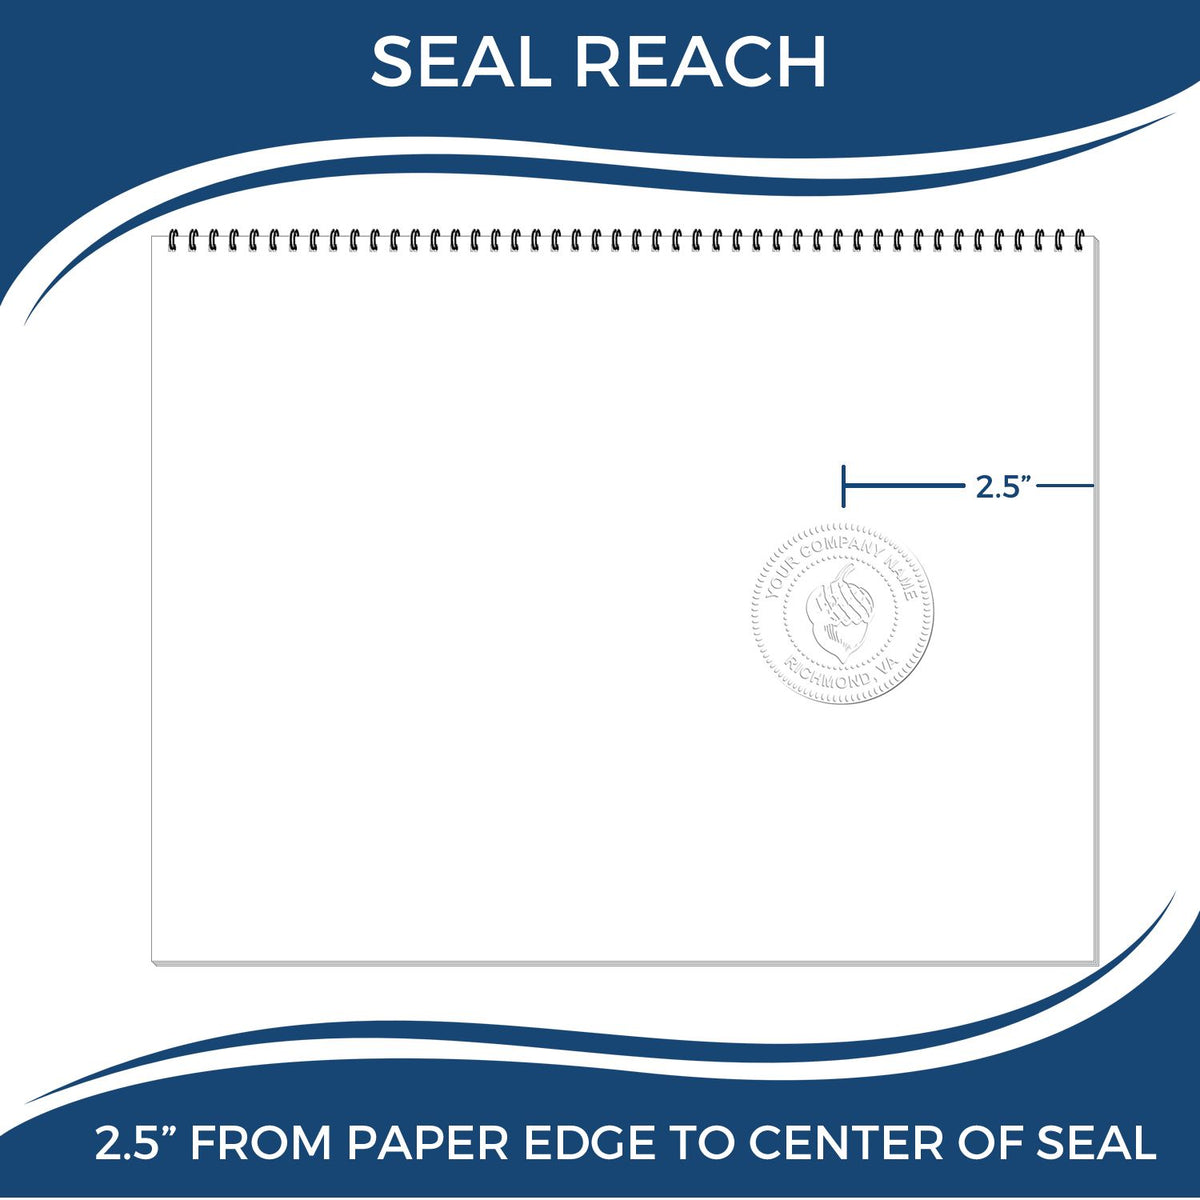 An infographic showing the seal reach which is represented by a ruler and a miniature seal image of the Heavy Duty Cast Iron Illinois Engineer Seal Embosser